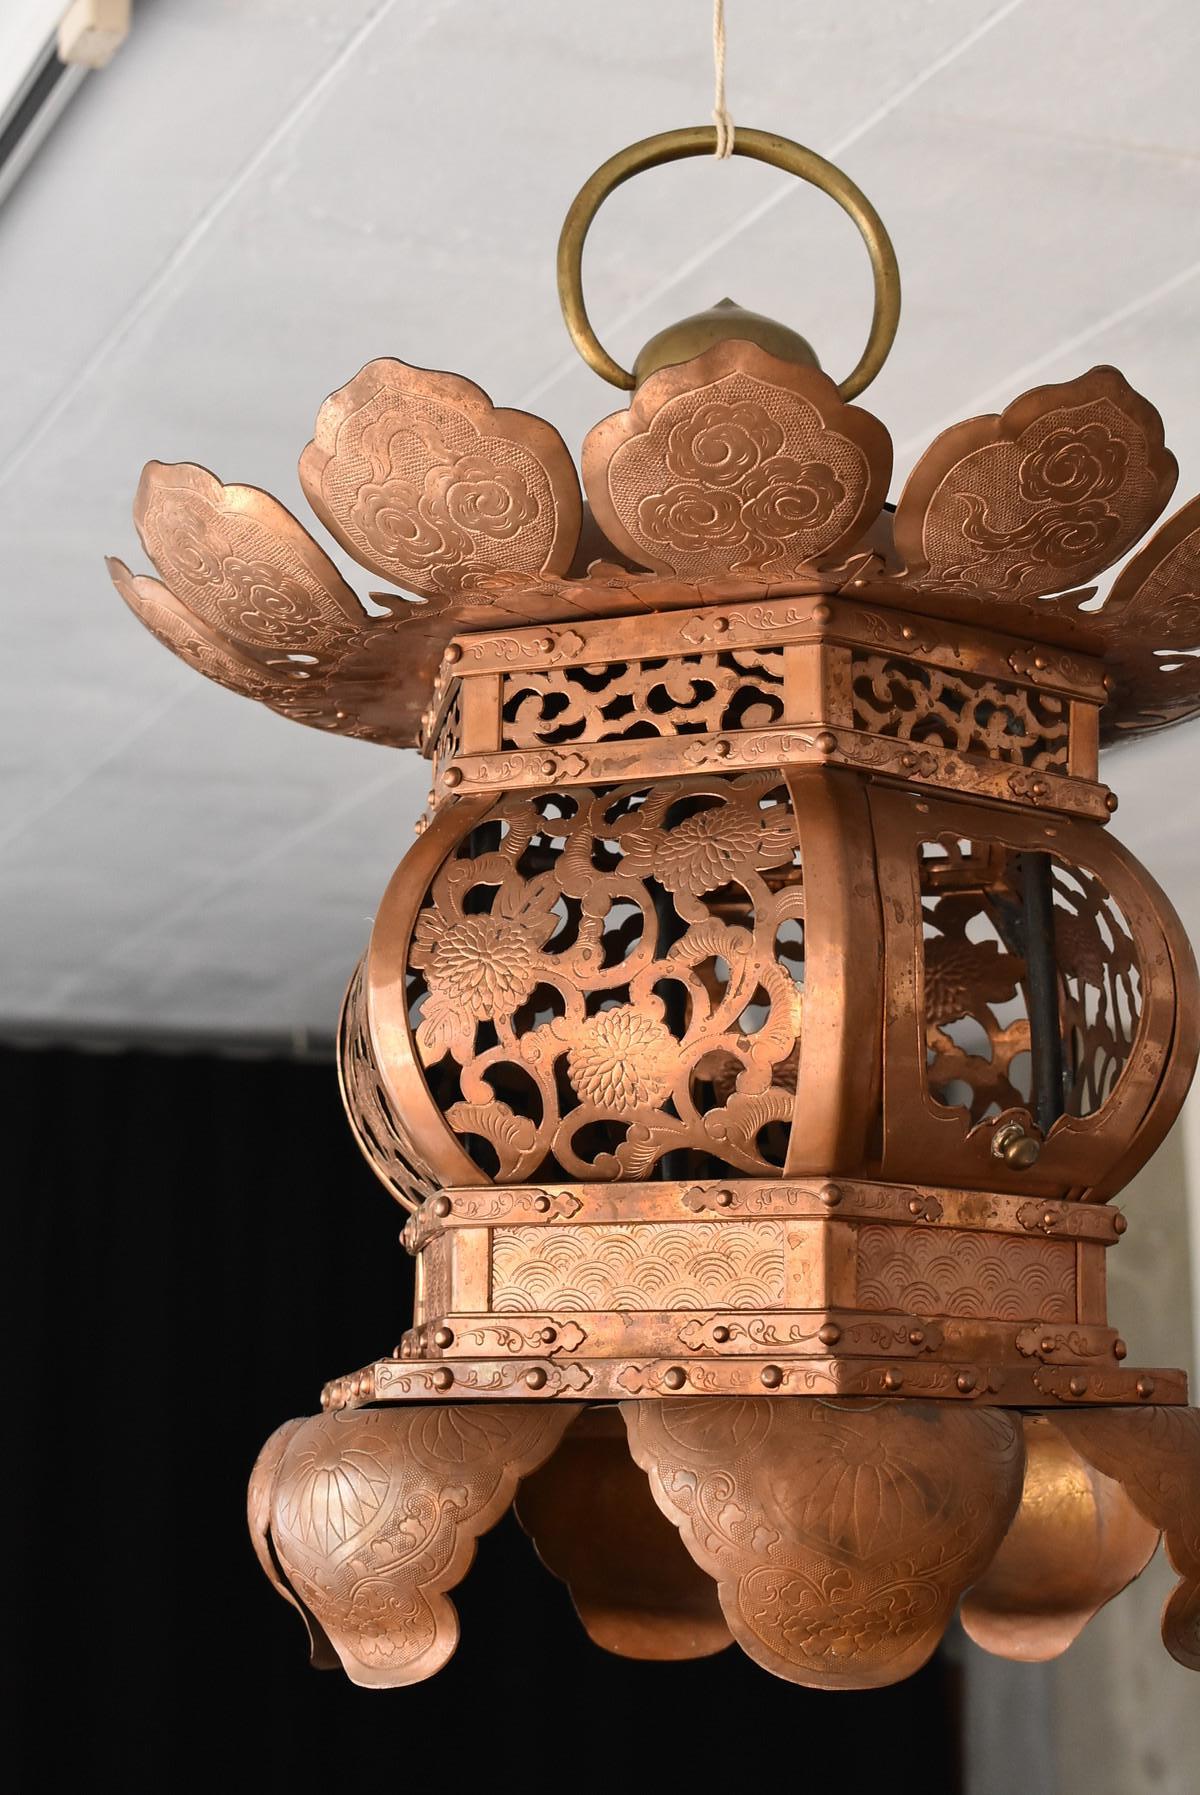 A copper hanging lantern made in the Showa period in Japan.
Lanterns are lighting fixtures displayed in Japanese temples.
This is a very luxurious and polite structure with engraving.
We make good use of thin copper plates.
It’s very